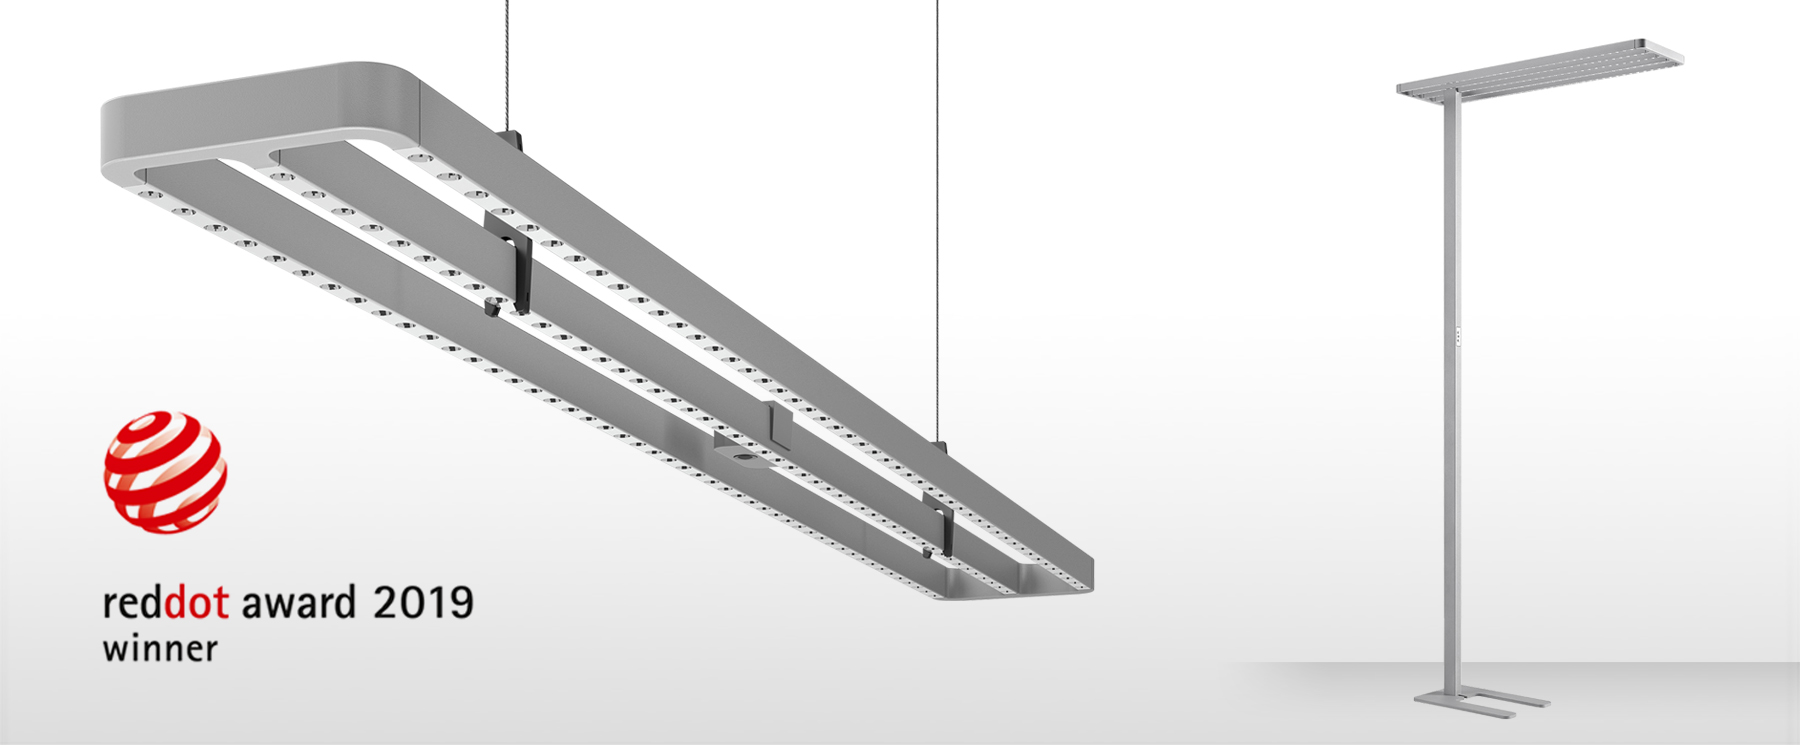 permeabilitet cricket himmel SMALL LINE WINS THE RED DOT DESIGN AWARD 2019 | New Lighting products